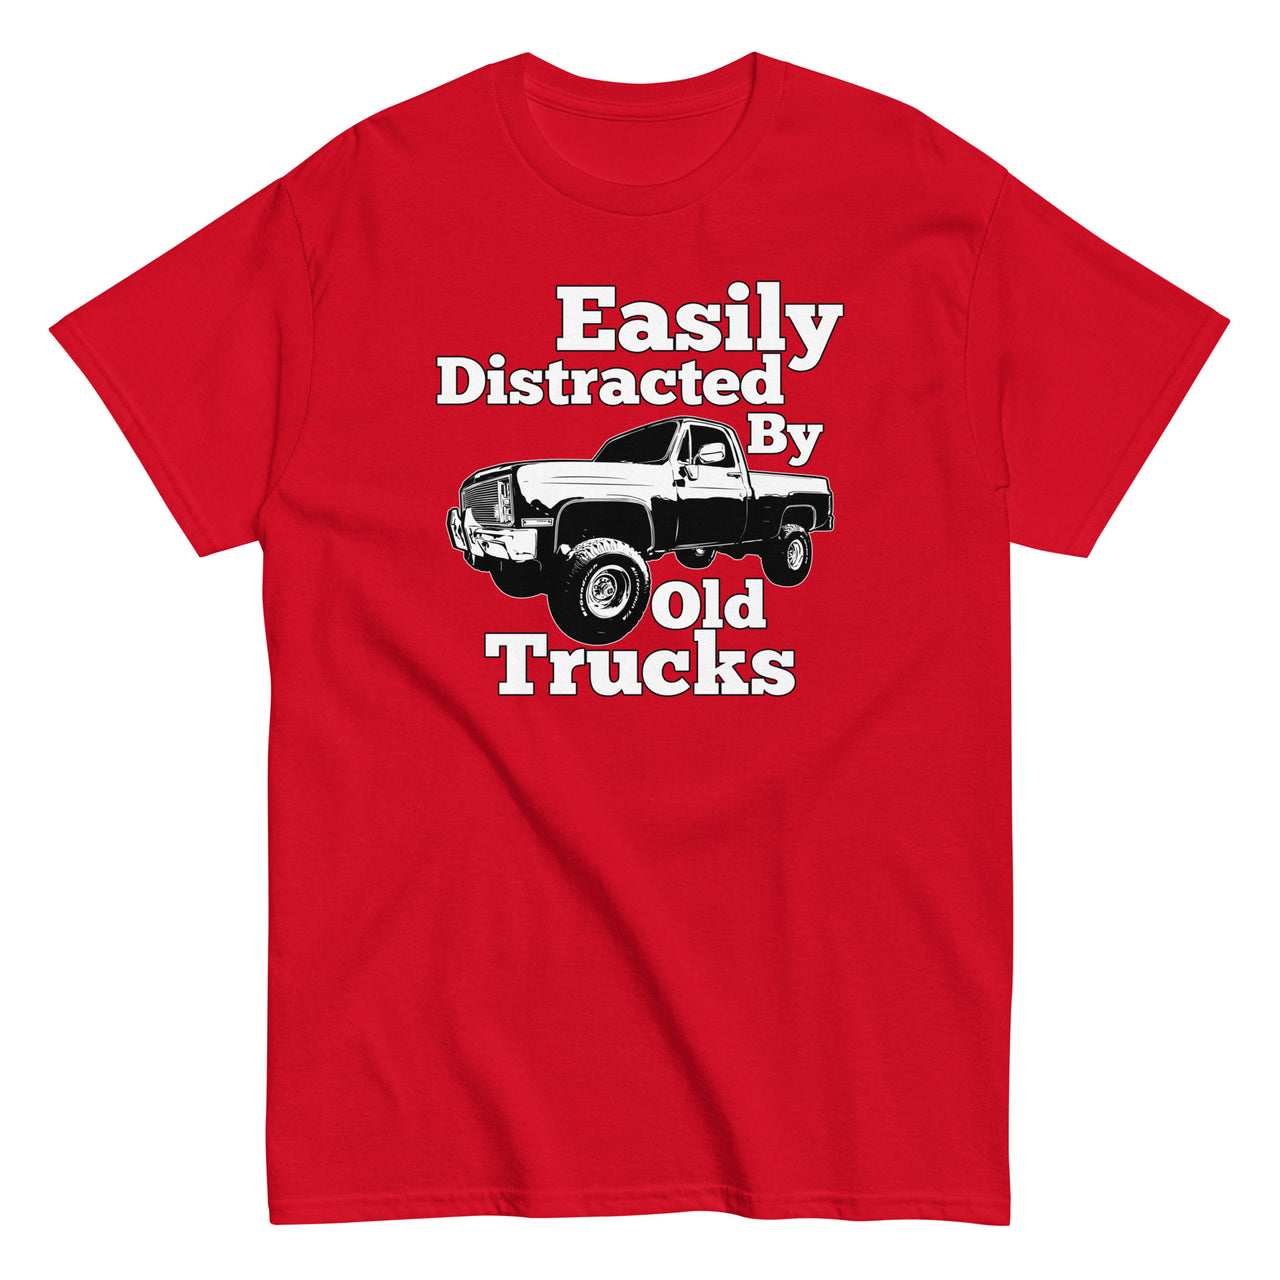 red Square Body Truck T-Shirt - Easily Distracted By Old Trucks